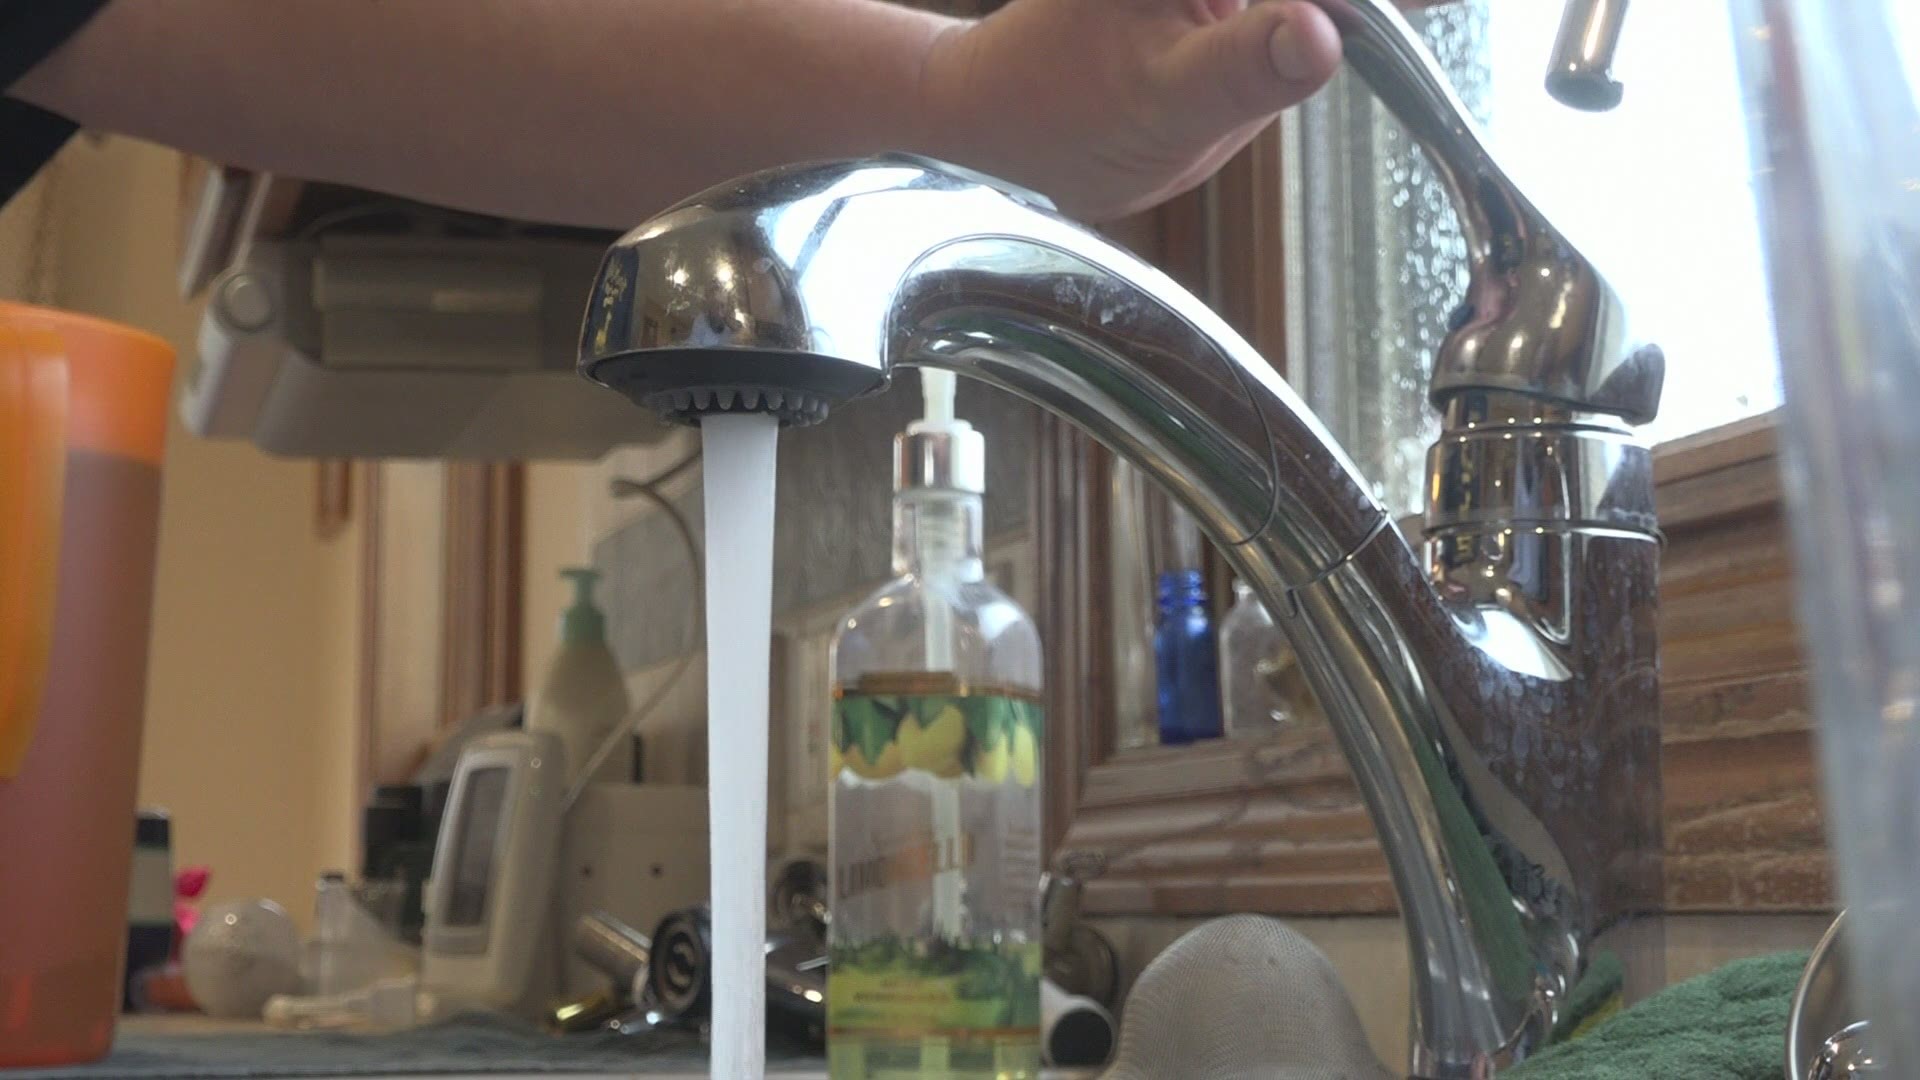 “PFAS contamination represents a clear and present danger to Michigan families,” said Upton.